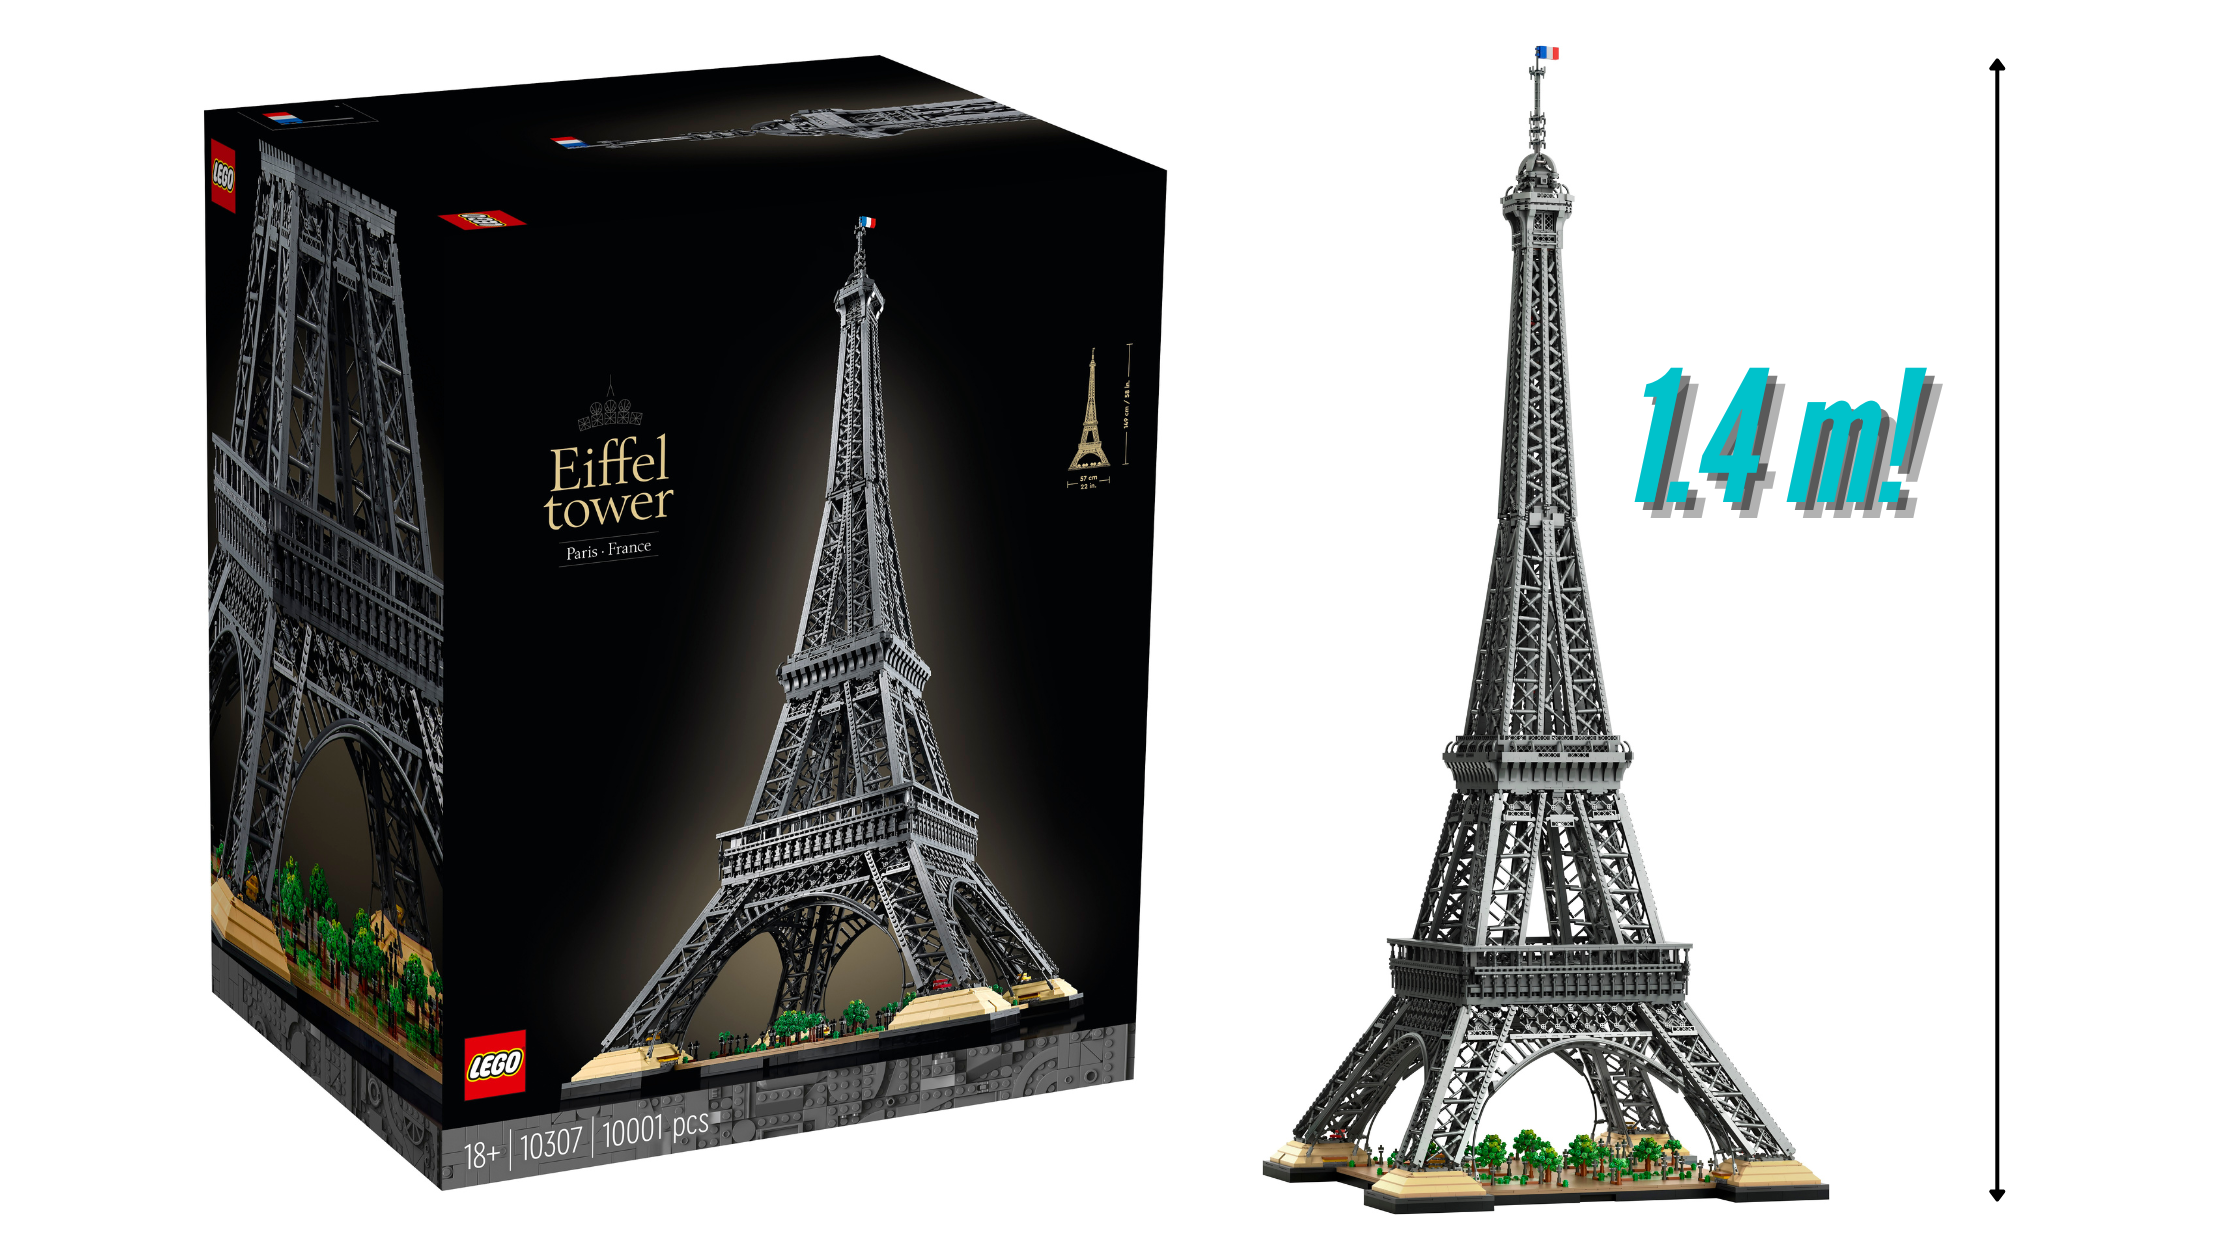 LEGO 10307 Eiffel Tower officially revealed. The tallest LEGO set yet